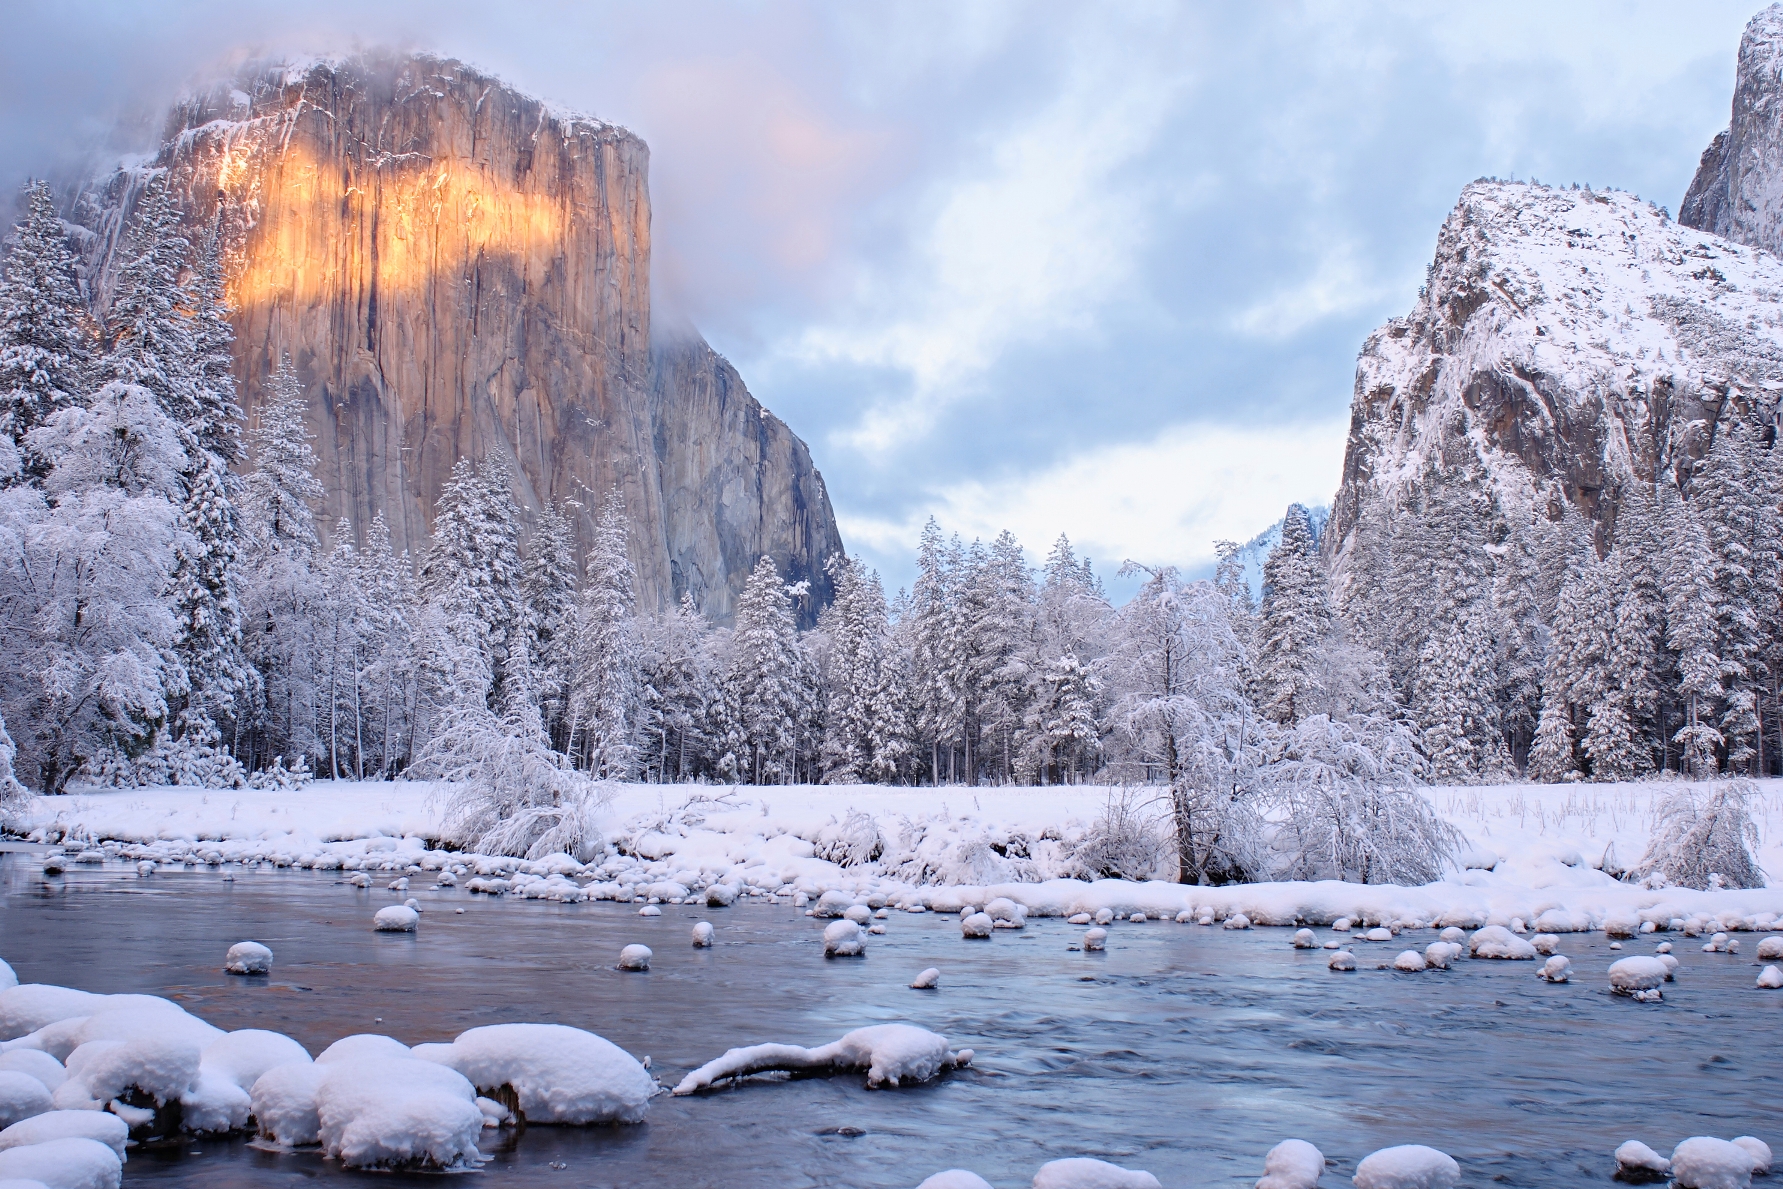 Yosemite National Park, CompassAndcamera/iStock. These images can only be used in context and conjunction with the promotion of the "Winter Wonderlands" guide and must include proper photo credit.